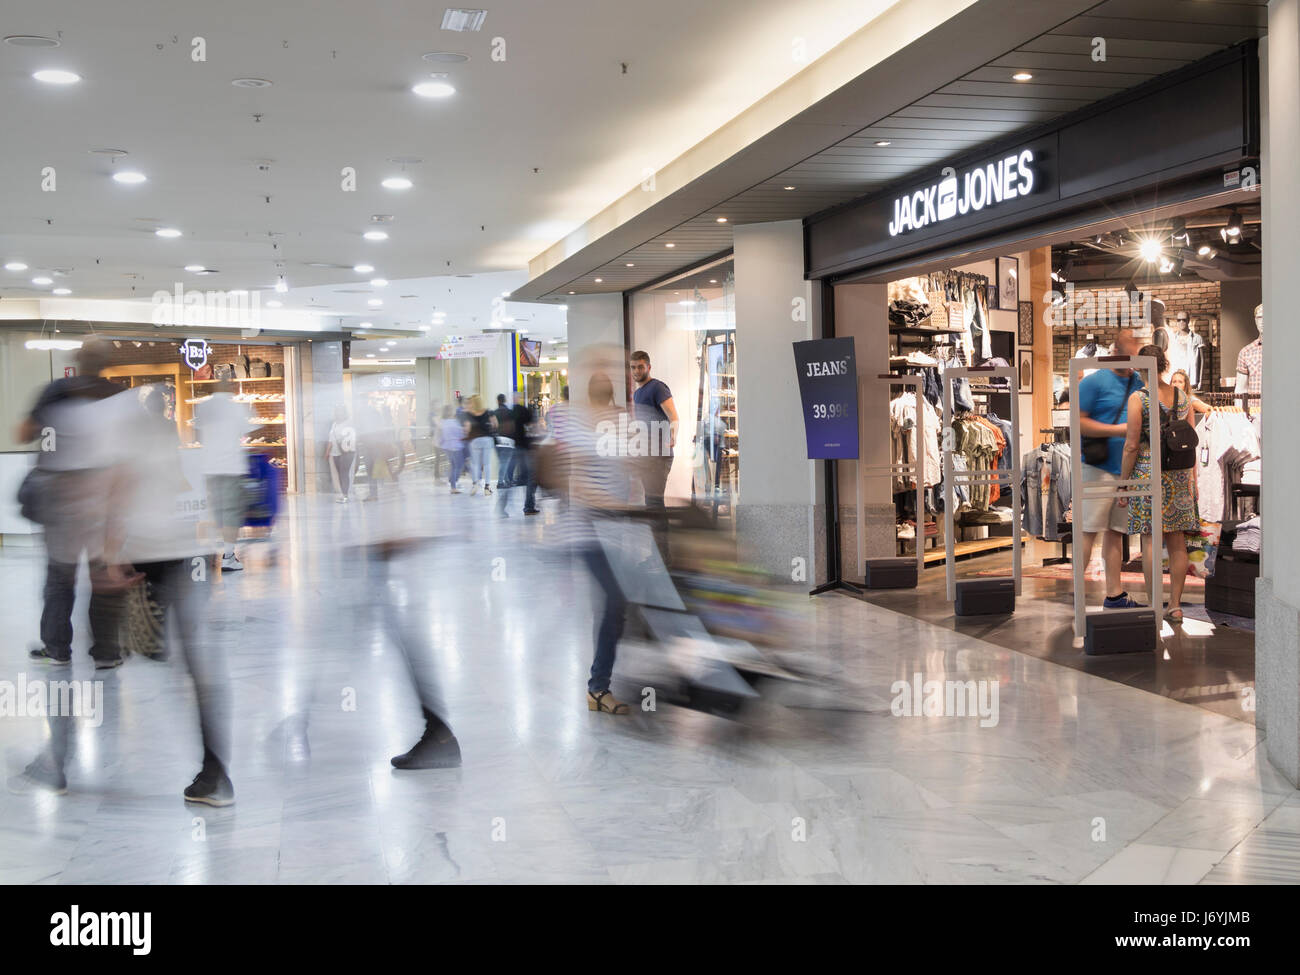 Ropa Interior Jack And Jones Shop Outlet, 56% OFF | connect-summary.com